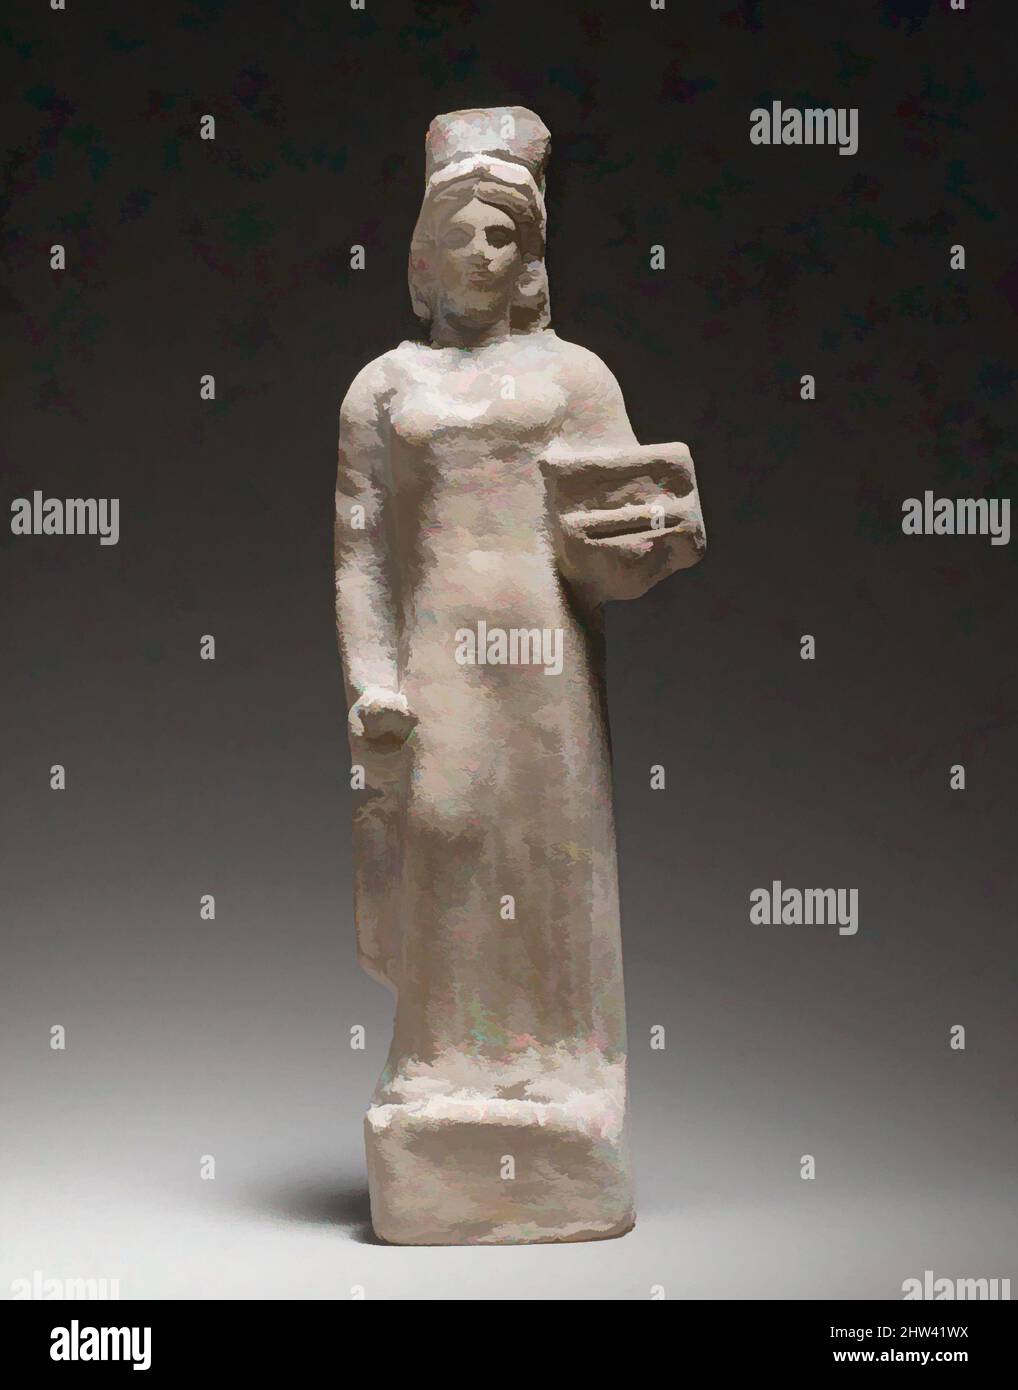 Art inspired by Terracotta figurine of a standing female votary holding a box, Cypro-Classical II, 4th century B.C., Cypriot, Terracotta; mold-made and hand-made, H. 8 3/4 in. (22.2 cm), Terracottas, The figurine is mold-made and solid. The back is handmade, partly flattened, and pared, Classic works modernized by Artotop with a splash of modernity. Shapes, color and value, eye-catching visual impact on art. Emotions through freedom of artworks in a contemporary way. A timeless message pursuing a wildly creative new direction. Artists turning to the digital medium and creating the Artotop NFT Stock Photo